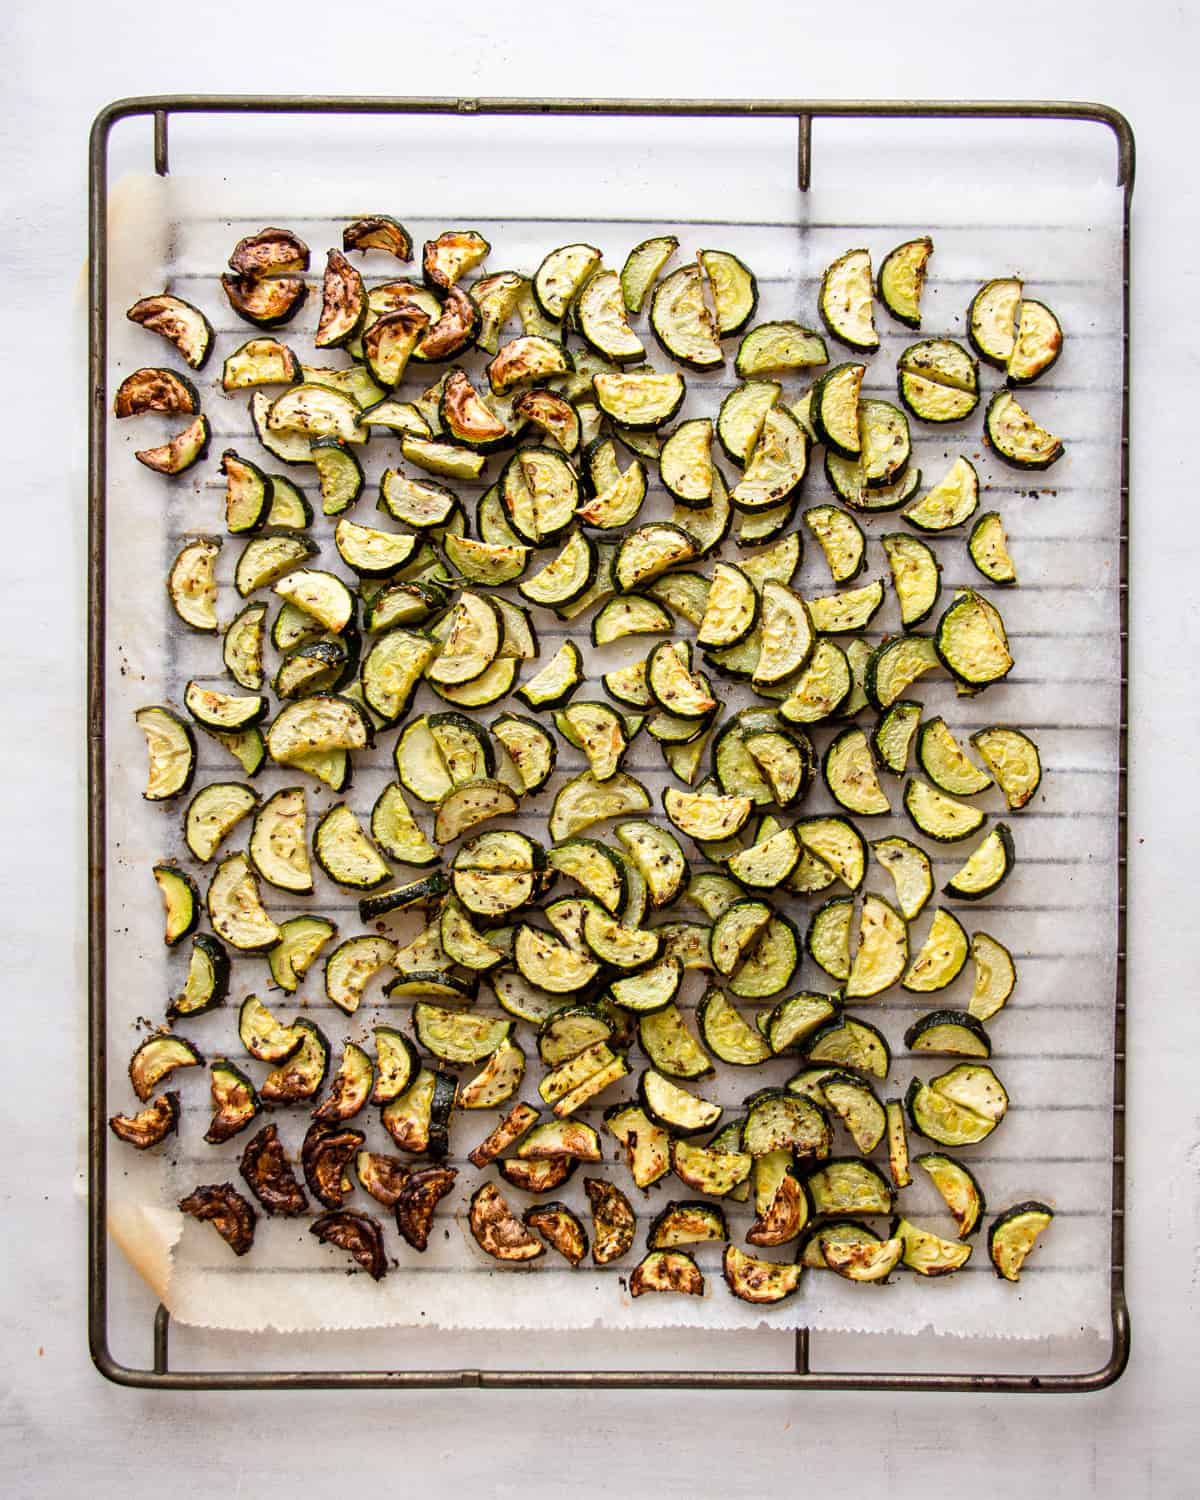 Oven-roasted zucchini on a parchment linked baking tray.